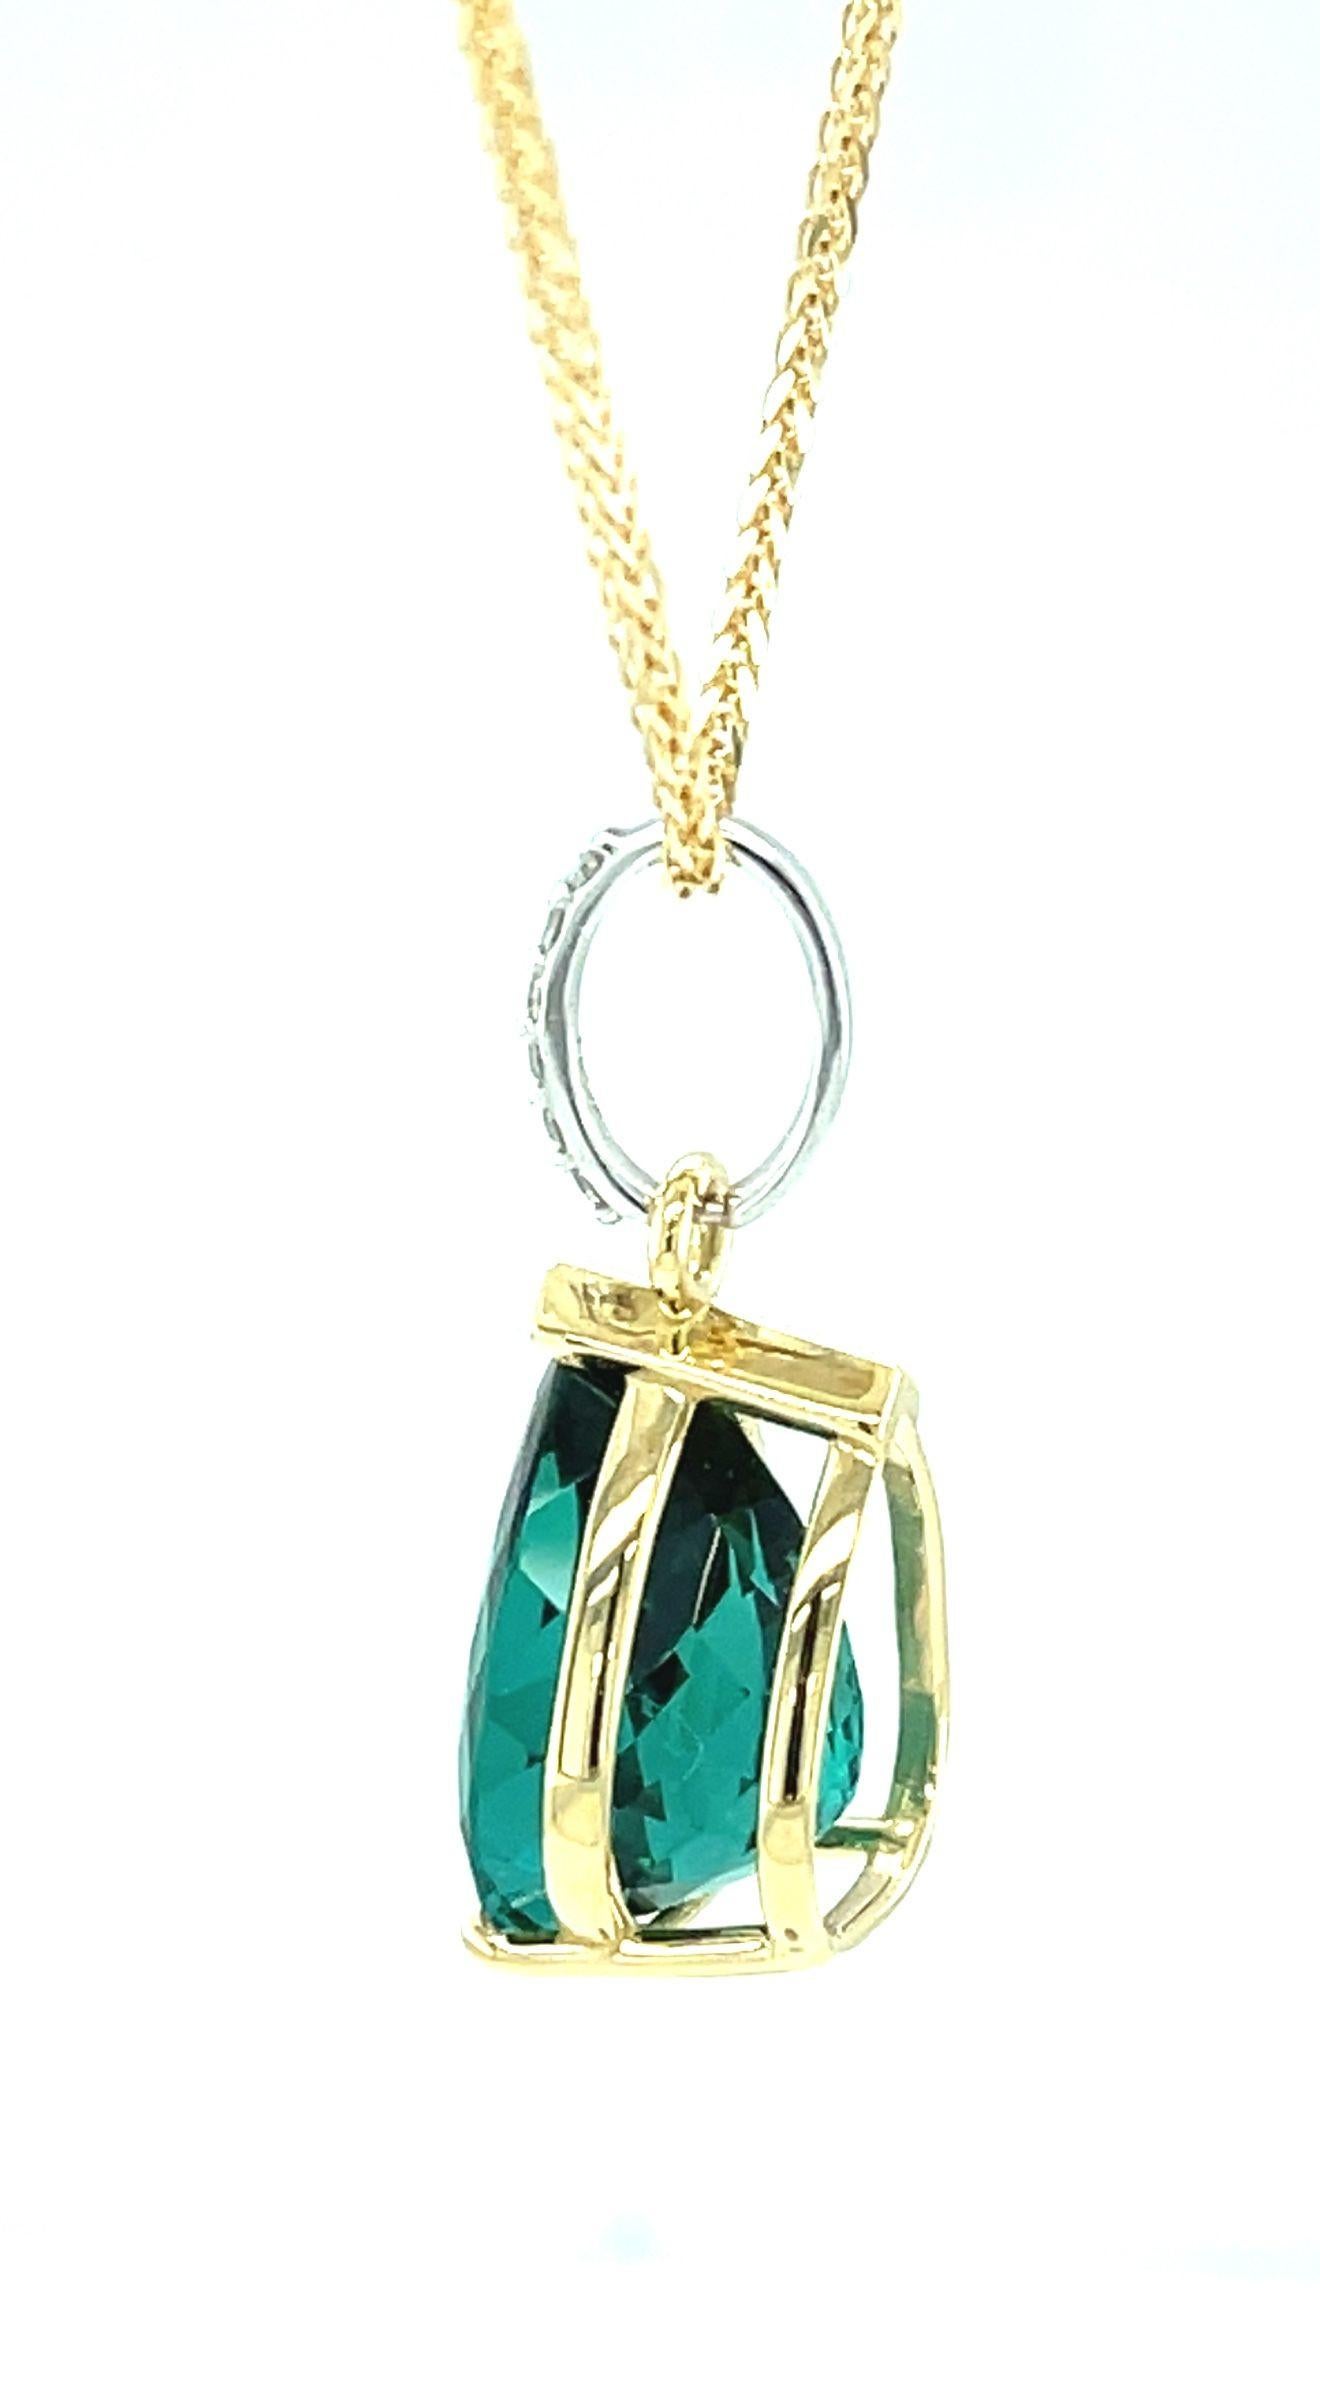 Indicolite Tourmaline and Diamond Pendant Necklace in Yellow Gold, 8.14 Carats In New Condition For Sale In Los Angeles, CA